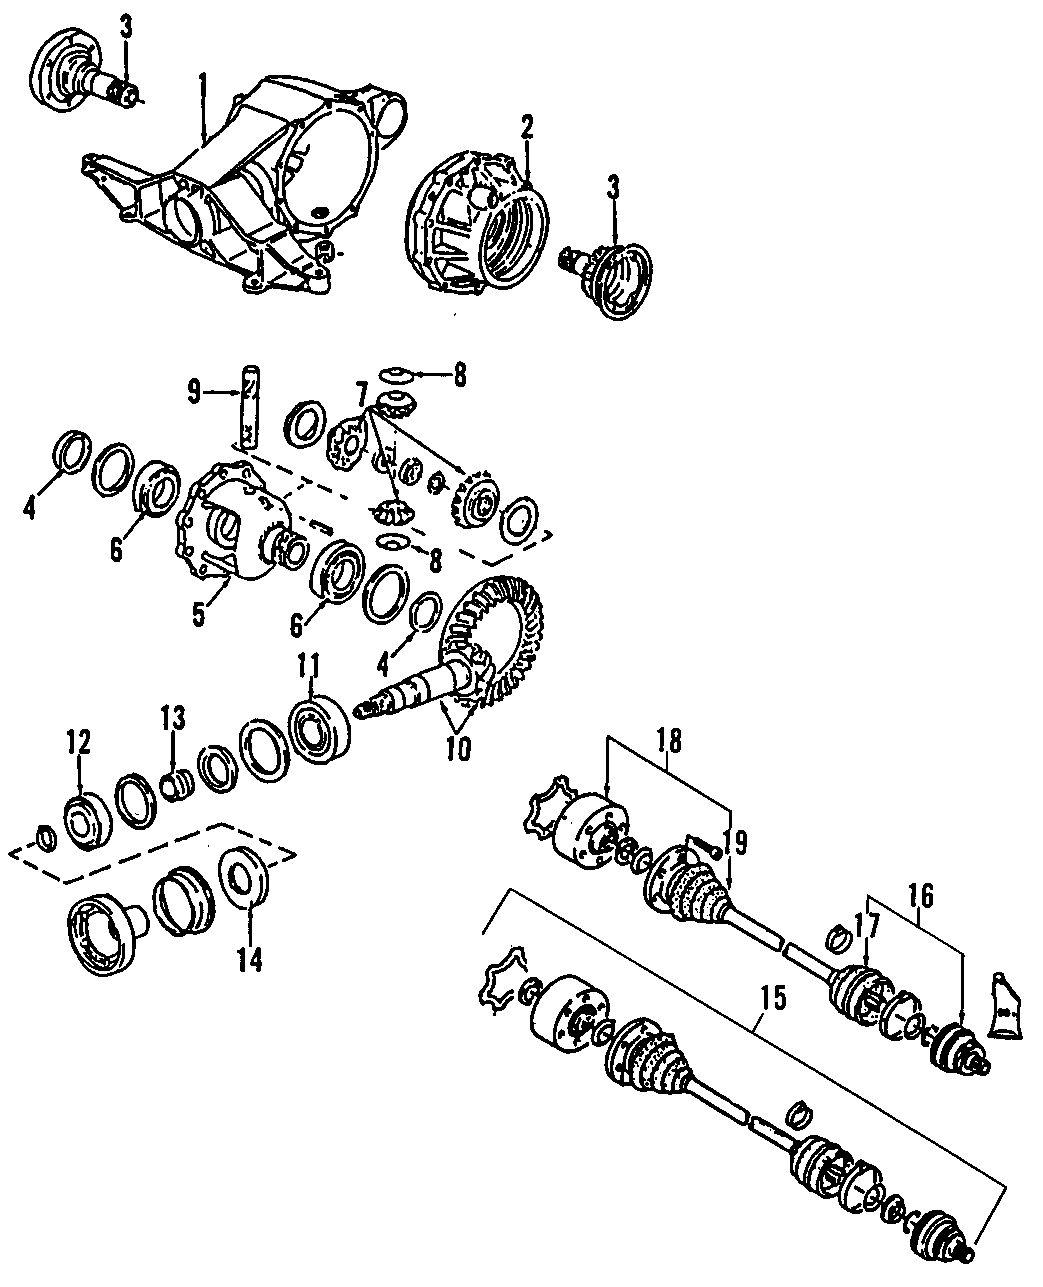 15DRIVE AXLES. REAR AXLE. AXLE SHAFTS & JOINTS. DIFFERENTIAL. PROPELLER SHAFT.https://images.simplepart.com/images/parts/motor/fullsize/F220090.png